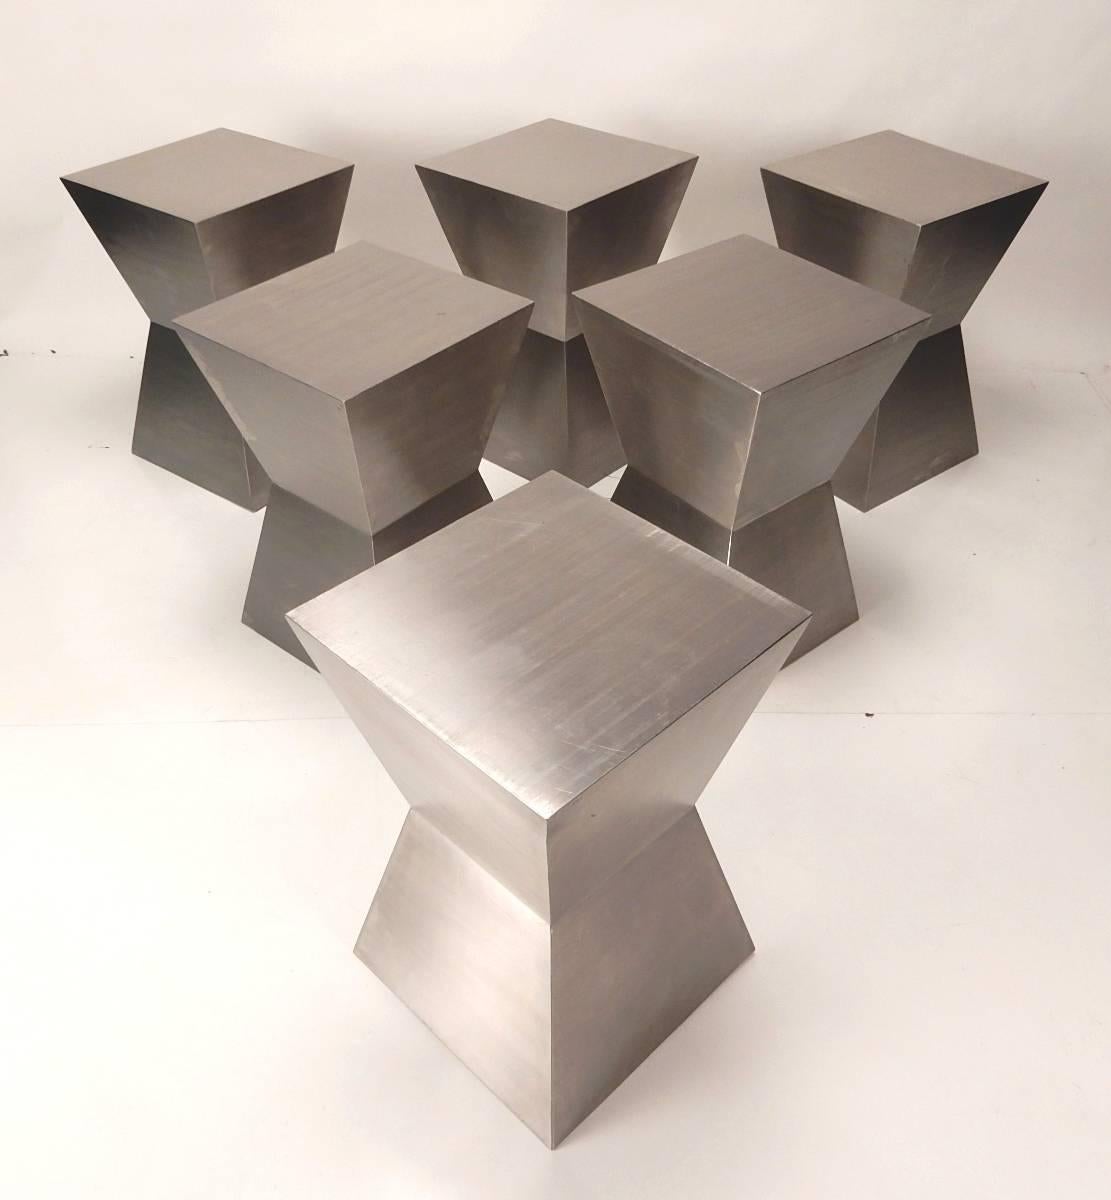 This set of six seamless, brushed stainless steel sculpture stools or tables, would make an amazing lounge area complete.

They nest together neatly like a puzzle or you can spread them around.
Faceted sides reflect light around the room. 
Heavy